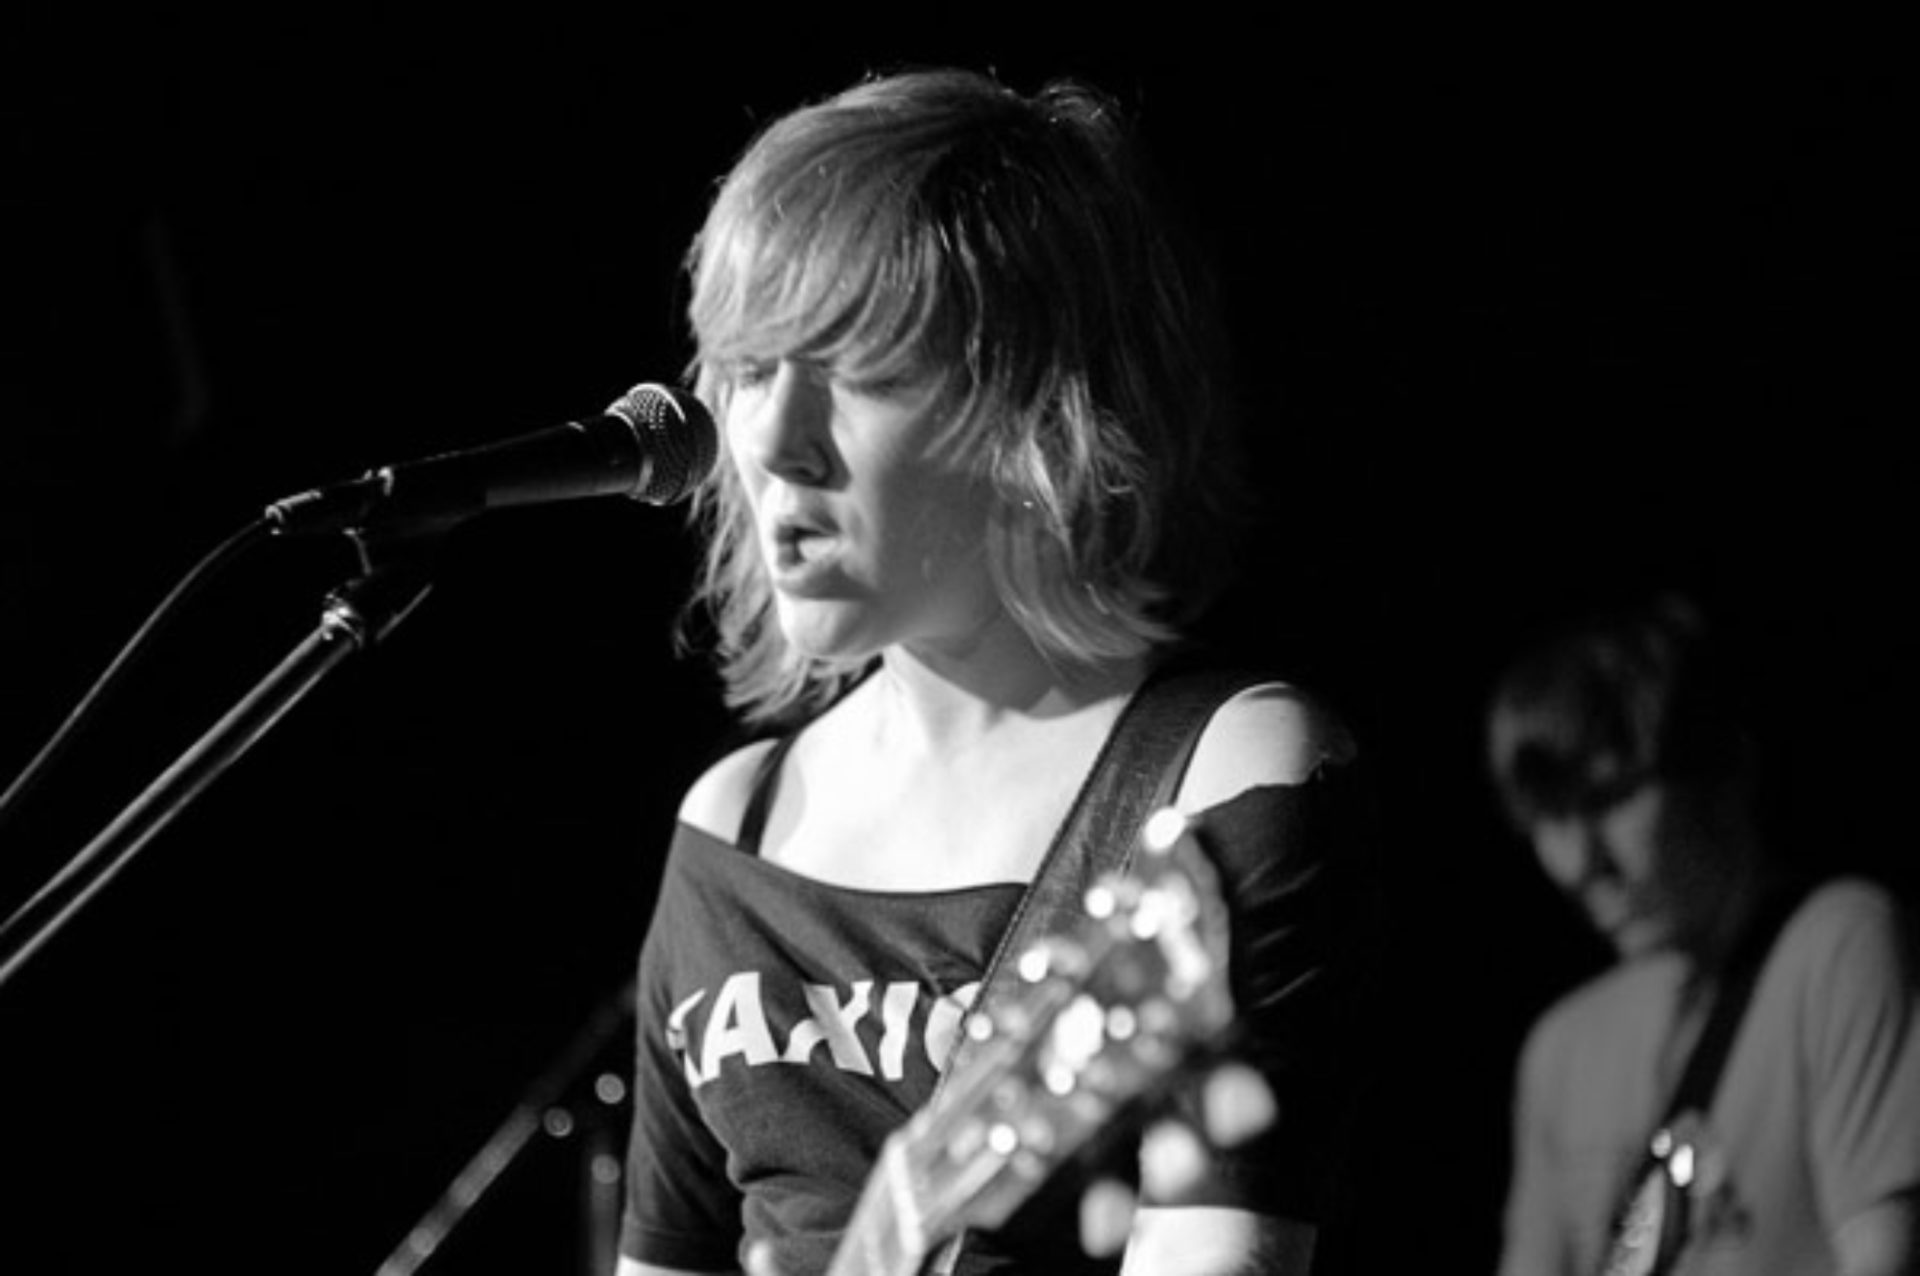 Sarge singer Elizabeth Elmore, a white woman, playing guitar and singing at a microphone. She has a bob with bangs, and is wearing what appears to be a cut up, collarless black t-shirt that lands below her shoulders.